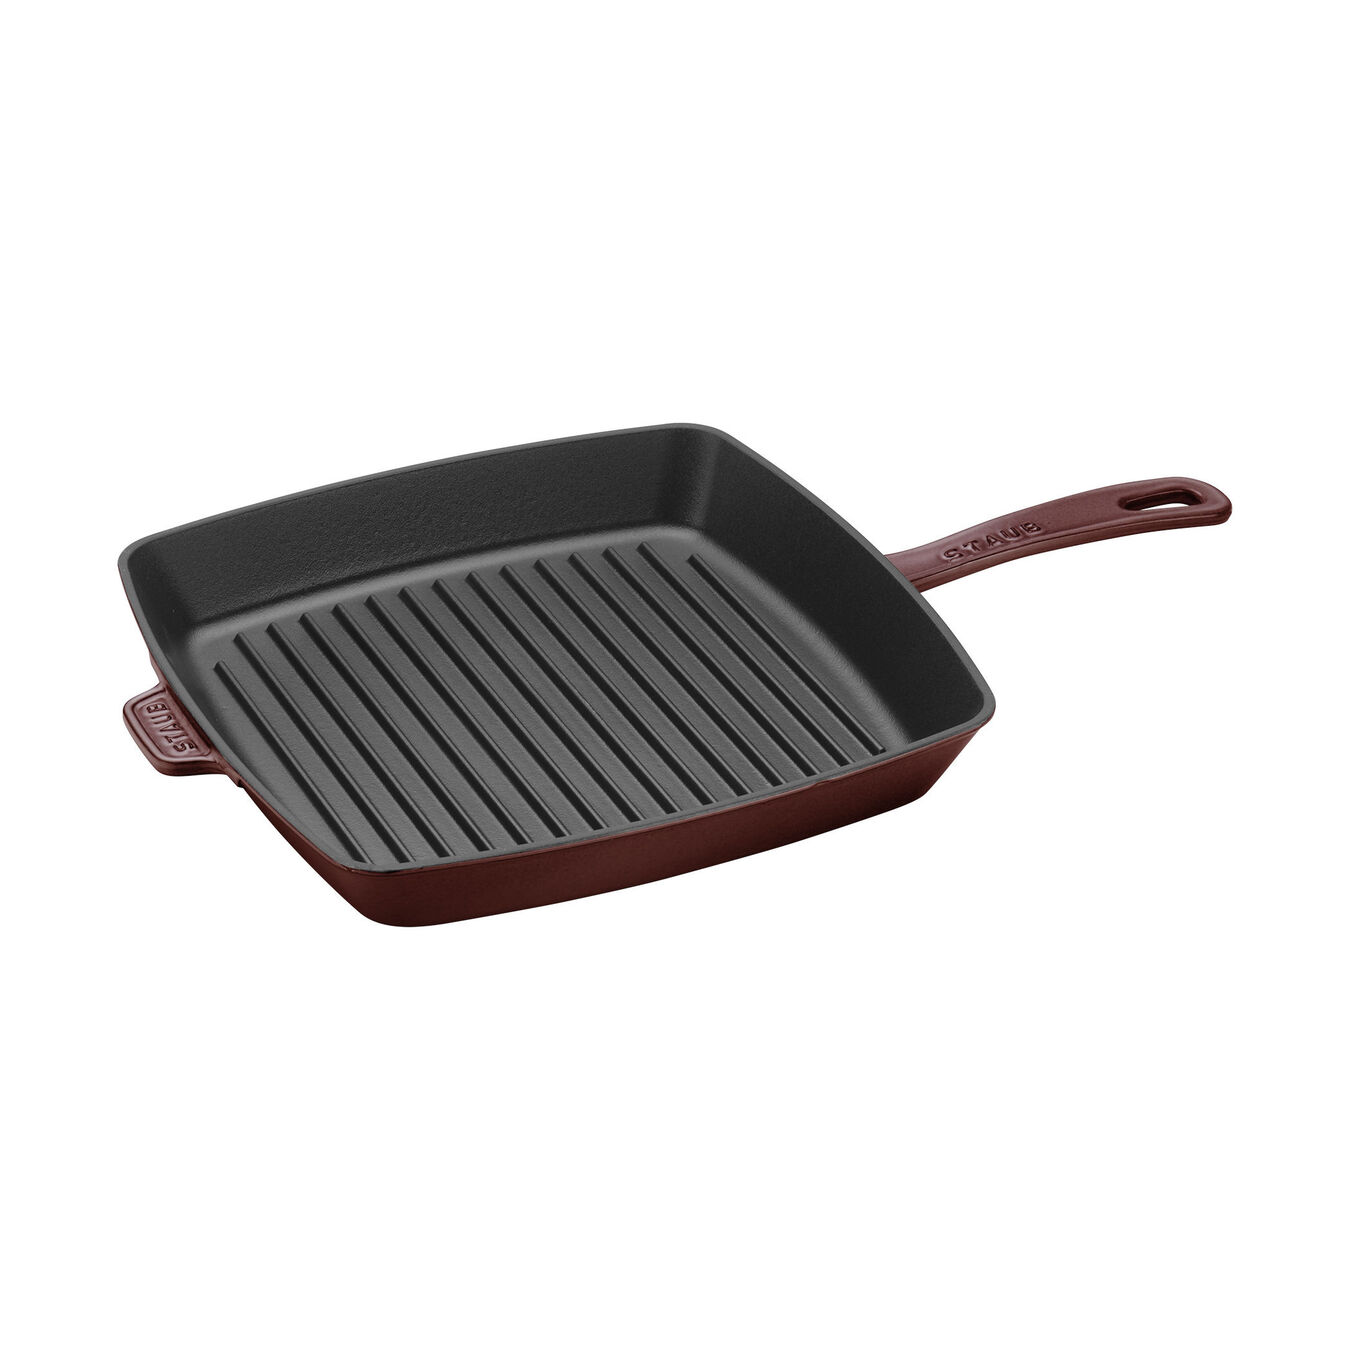 26 cm cast iron square American grill, grenadine-red,,large 1